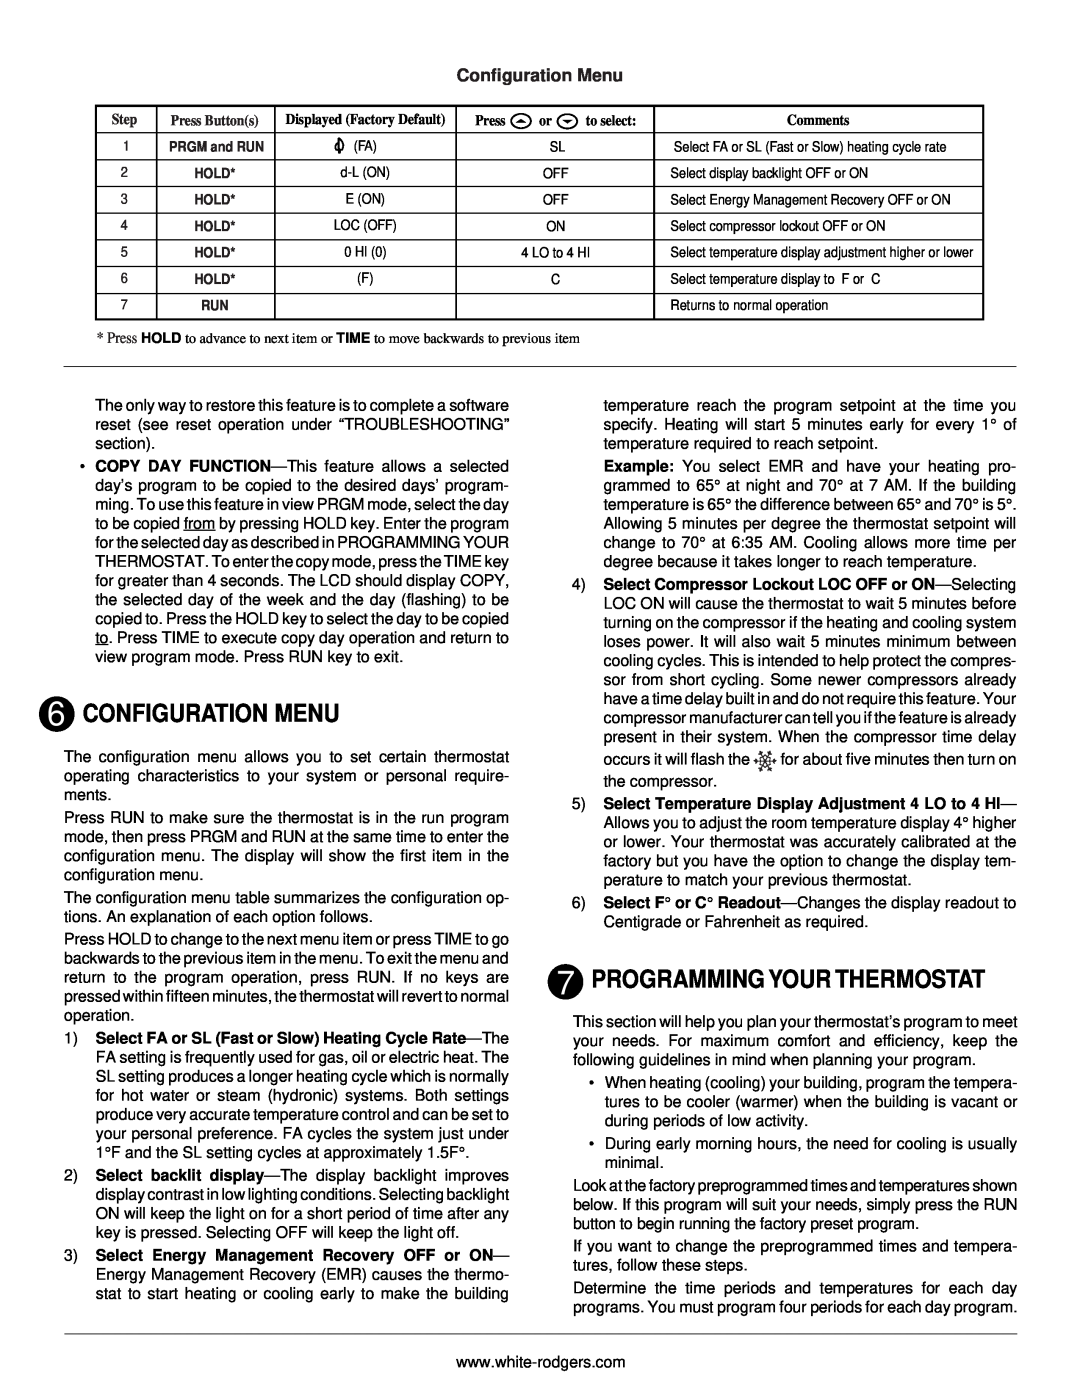 White Rodgers 775 installation instructions Configuration Menu, Programming Your Thermostat 